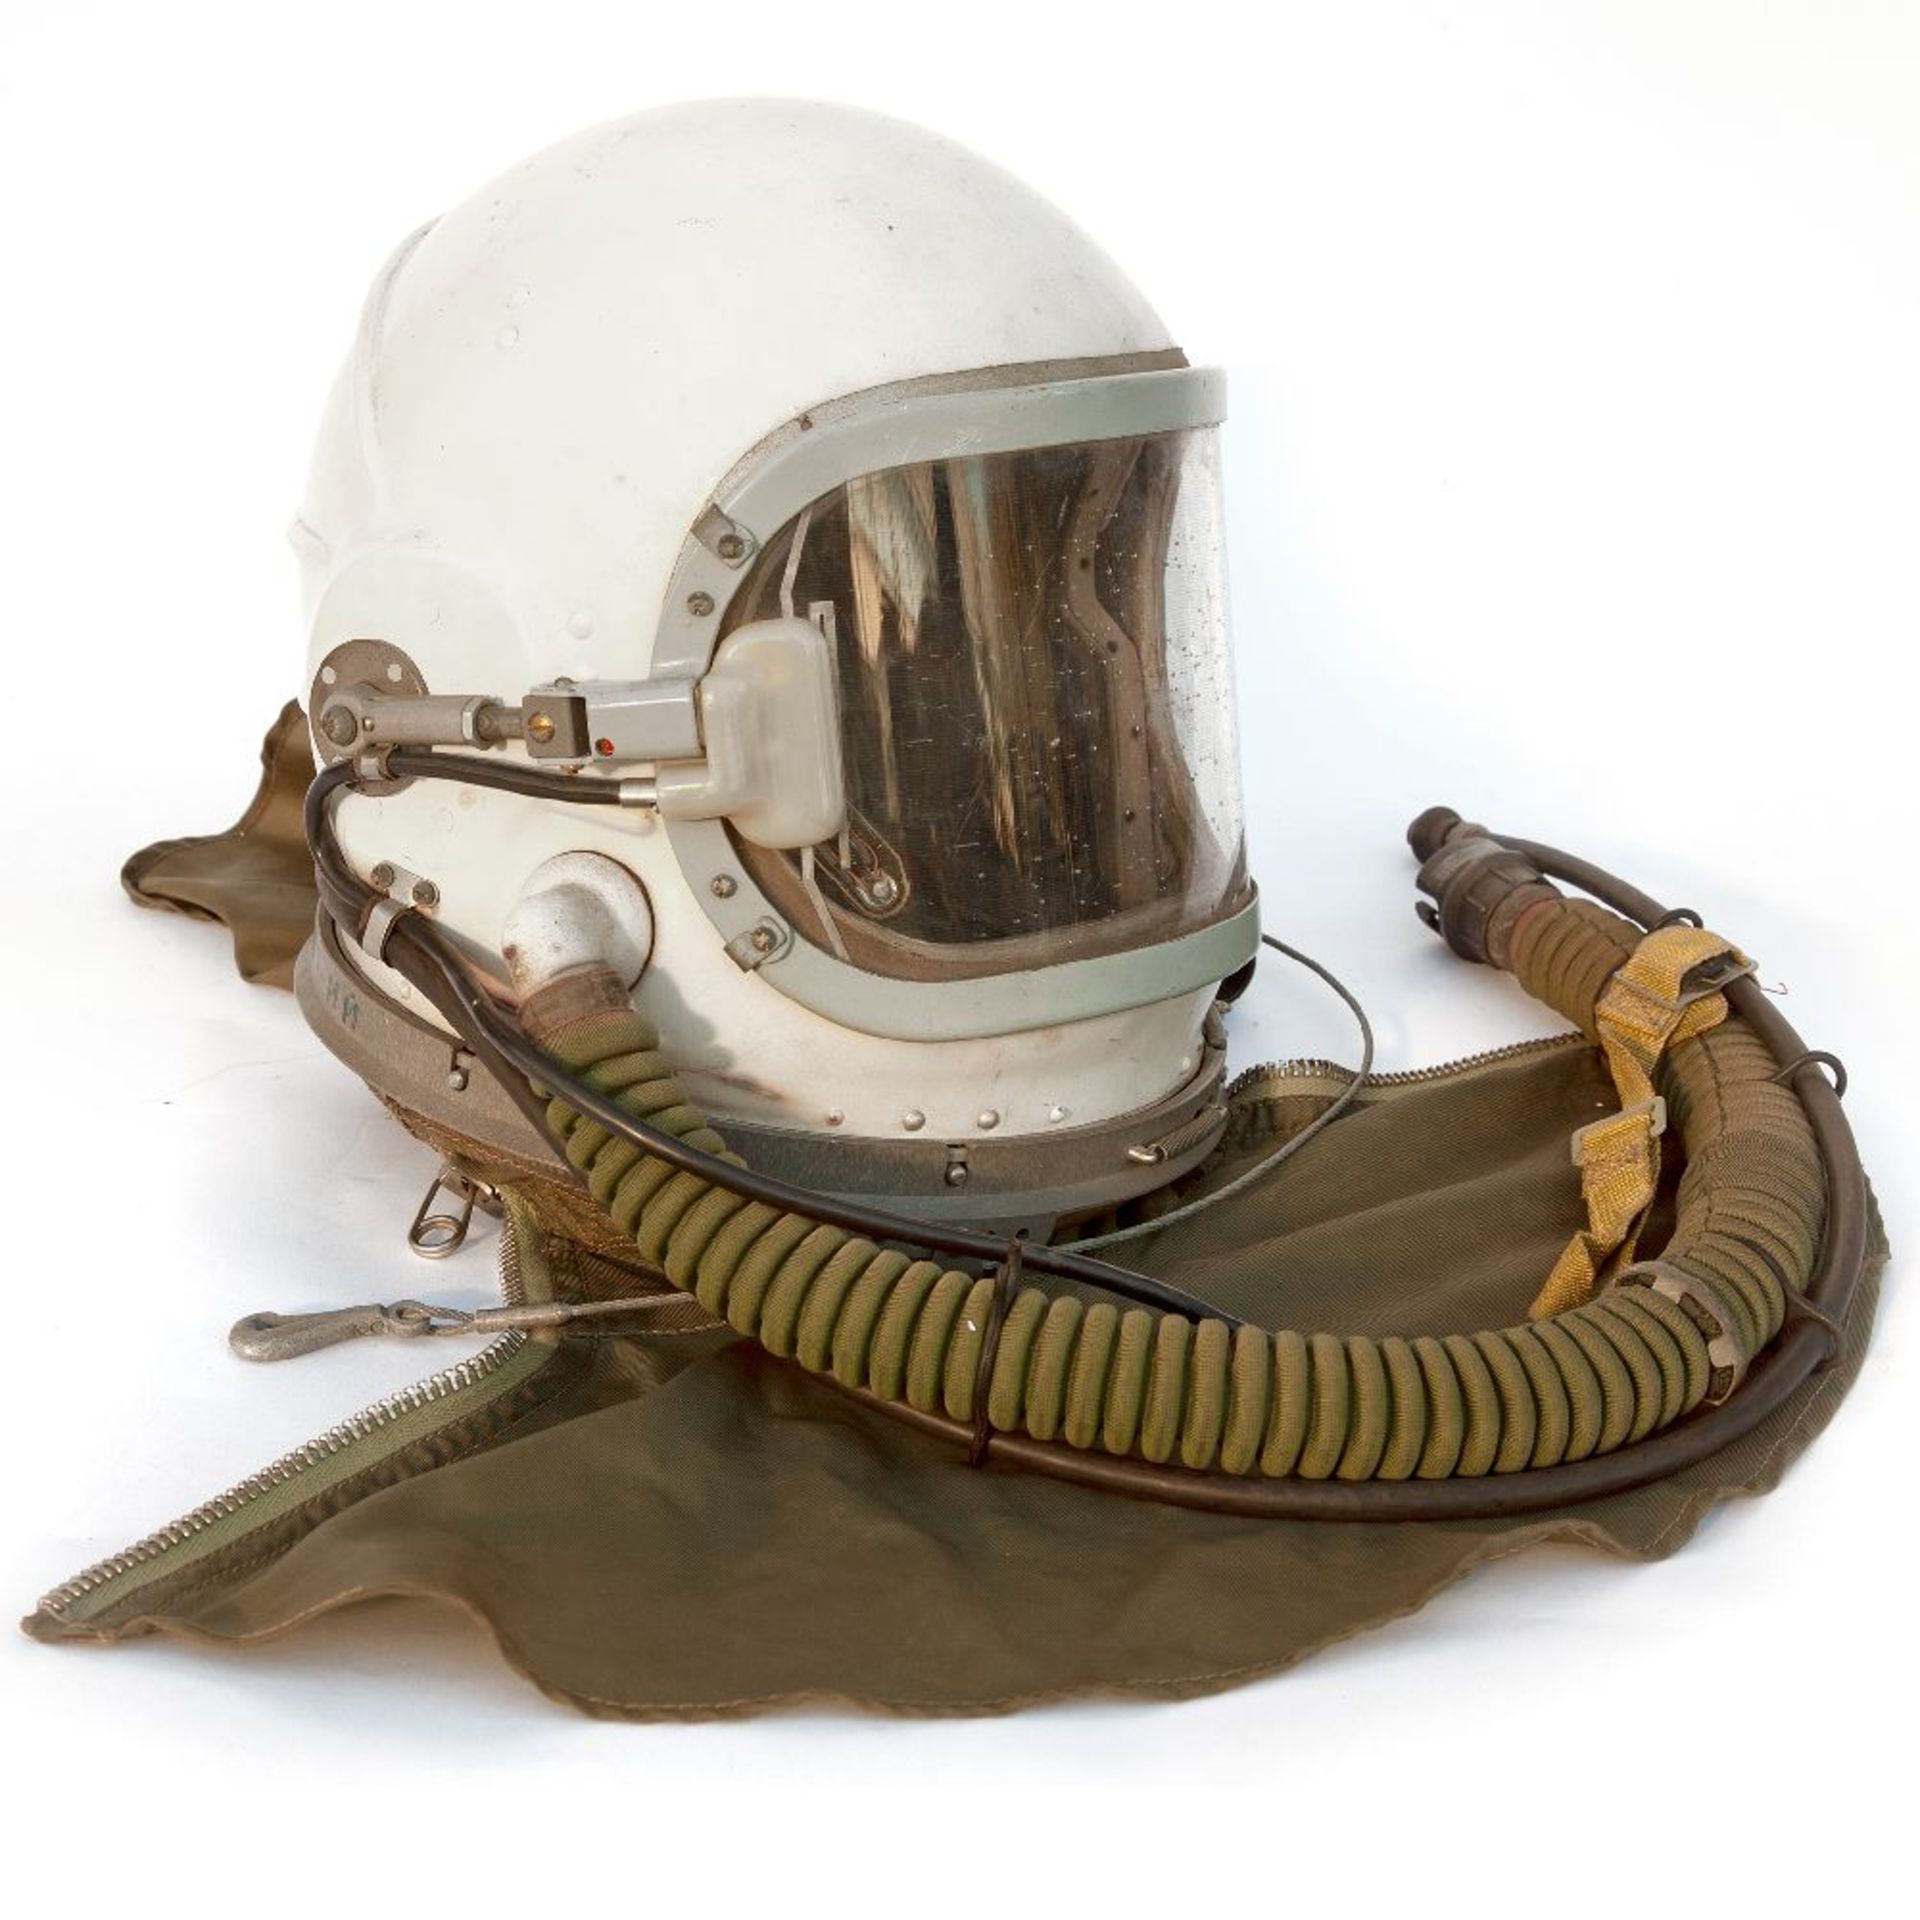 A COLD WAR SOVIET MIG 25 PILOT'S HELMET,c.1960-65, constructed for high altitude flight, also used